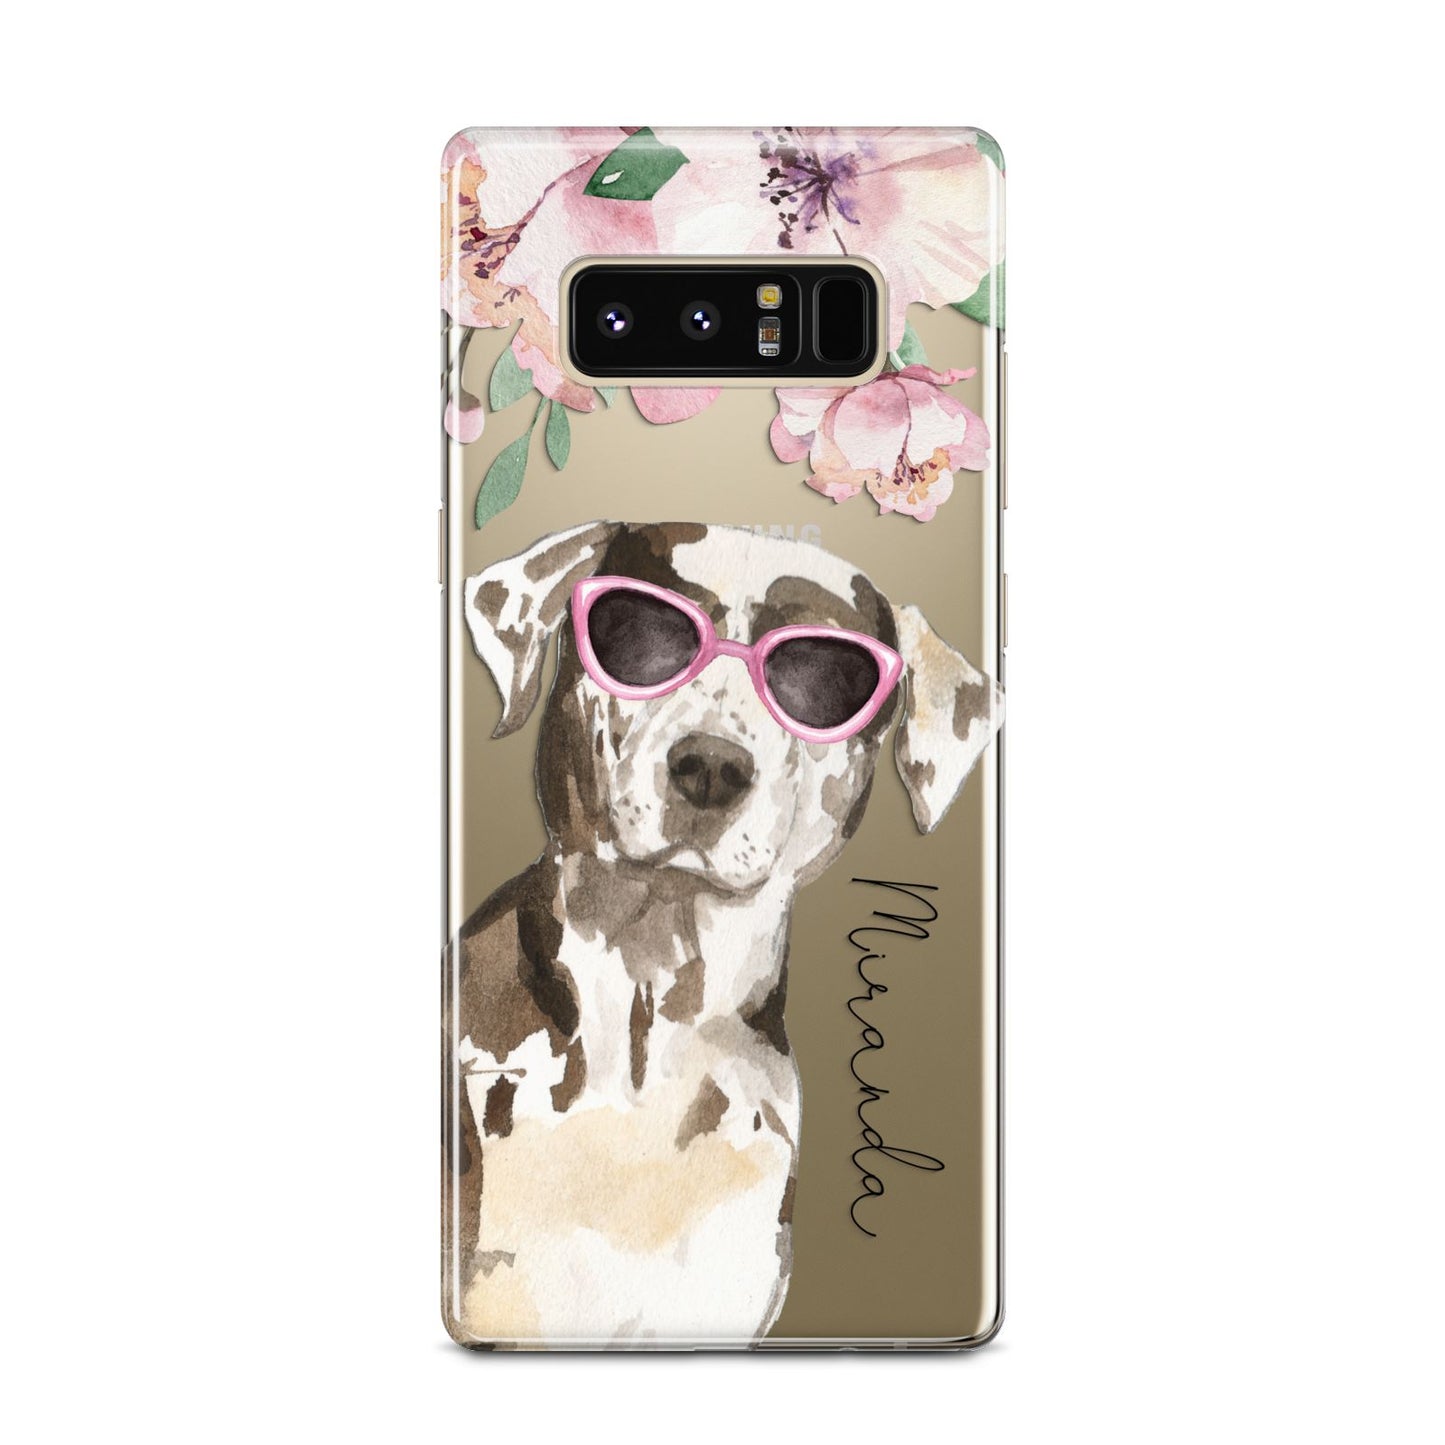 Personalised Catahoula Leopard Dog Samsung Galaxy Note 8 Case